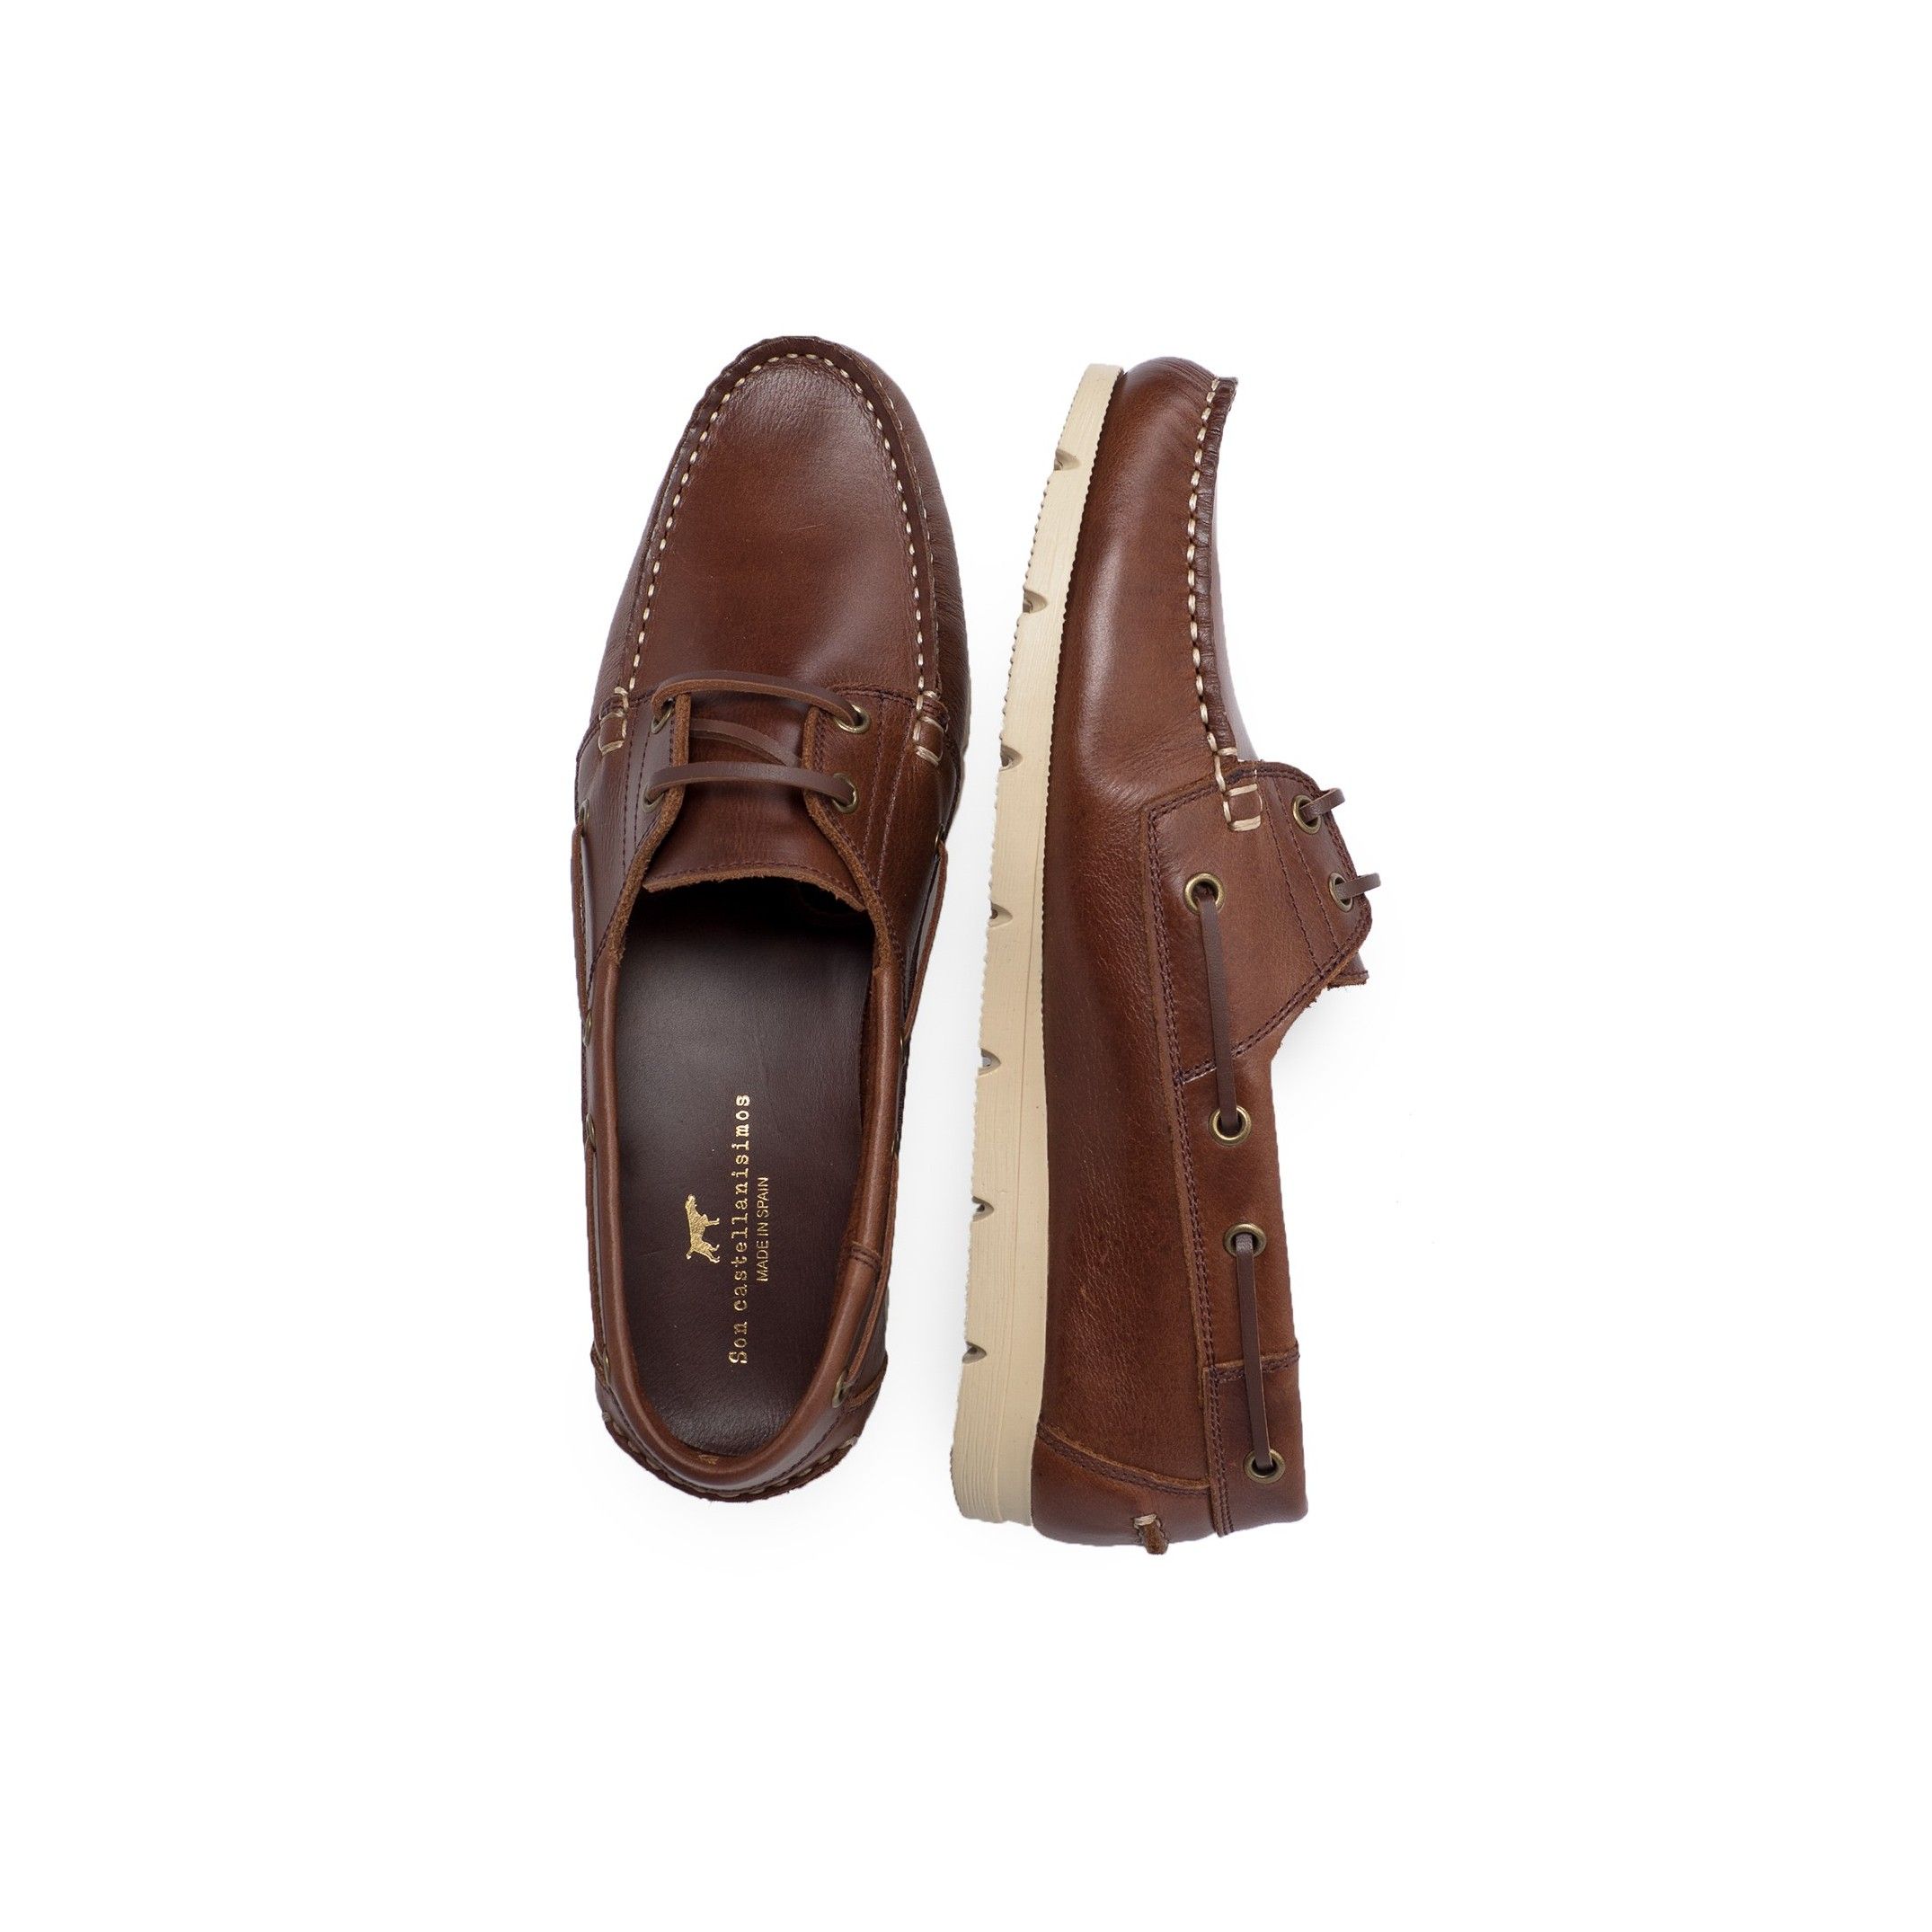 Leather boat shoes, by Son Castellanisimos. Upper made of cowhide leather. Leather Laces closure. Inner and insole made of cowhide leather. Sole material: synthetic and non-slip. Heel height: 1,5 cm. Designed and made in Spain.